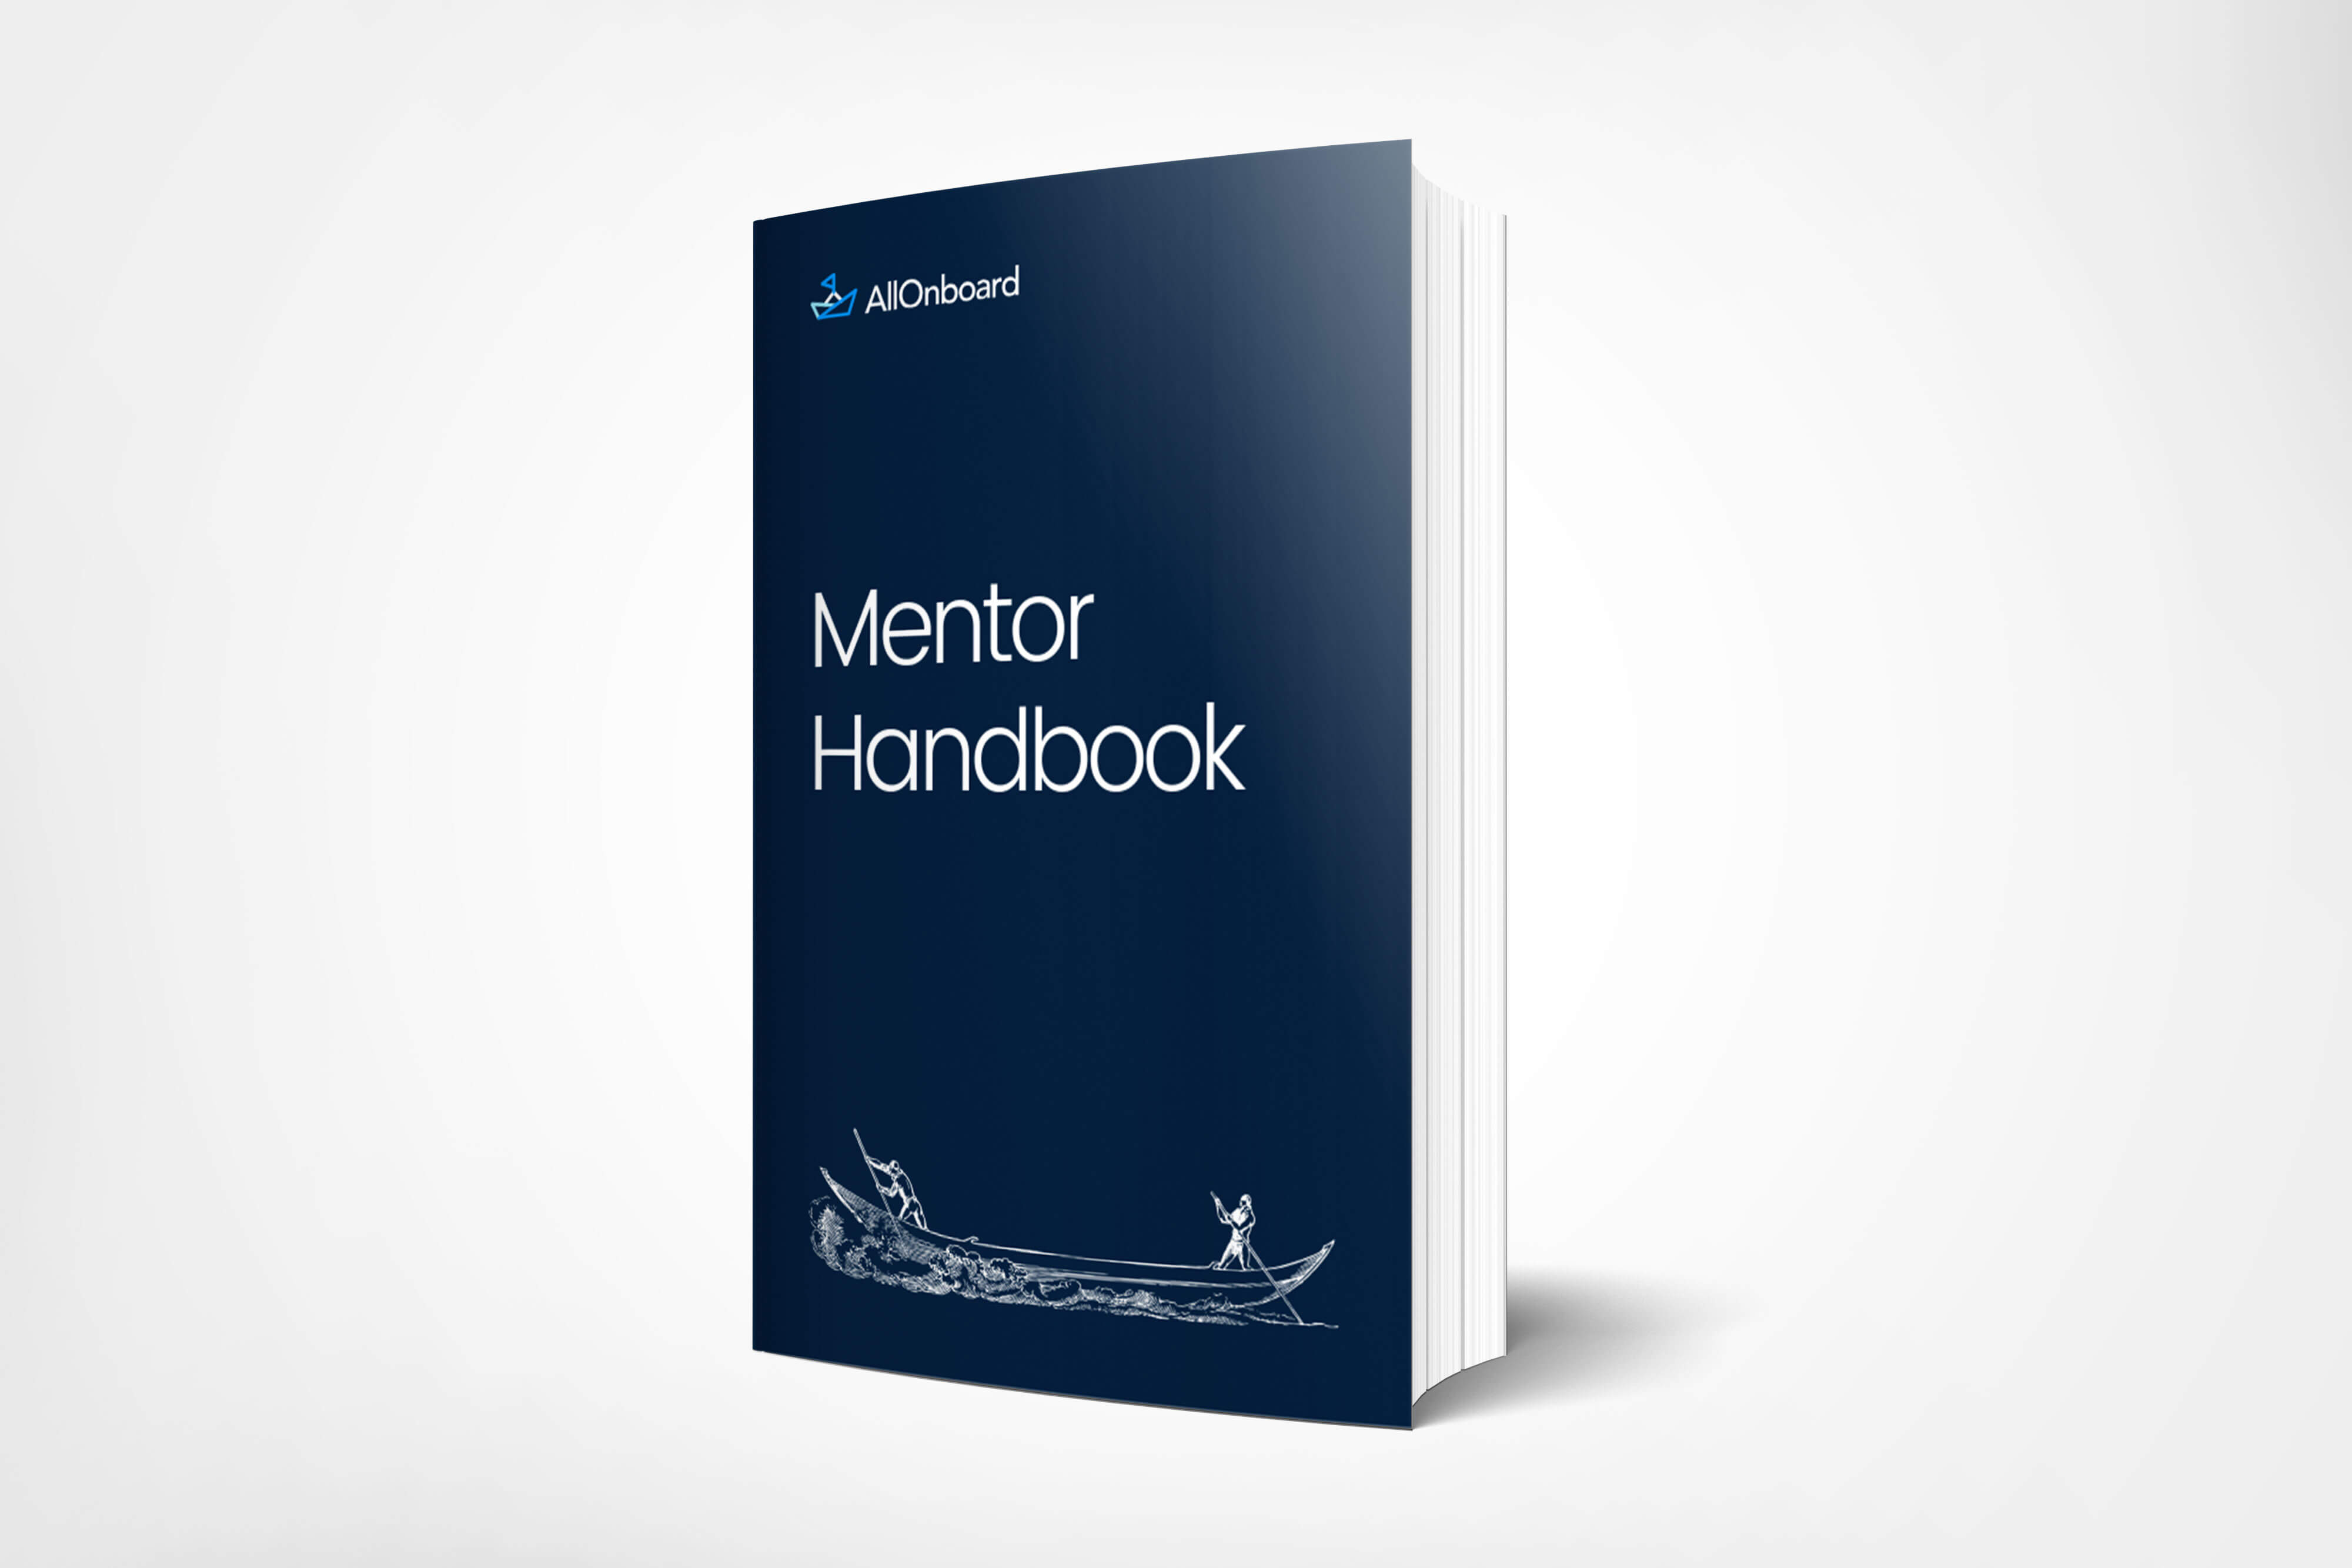 get your employee mentors set up for success with this simple guide.